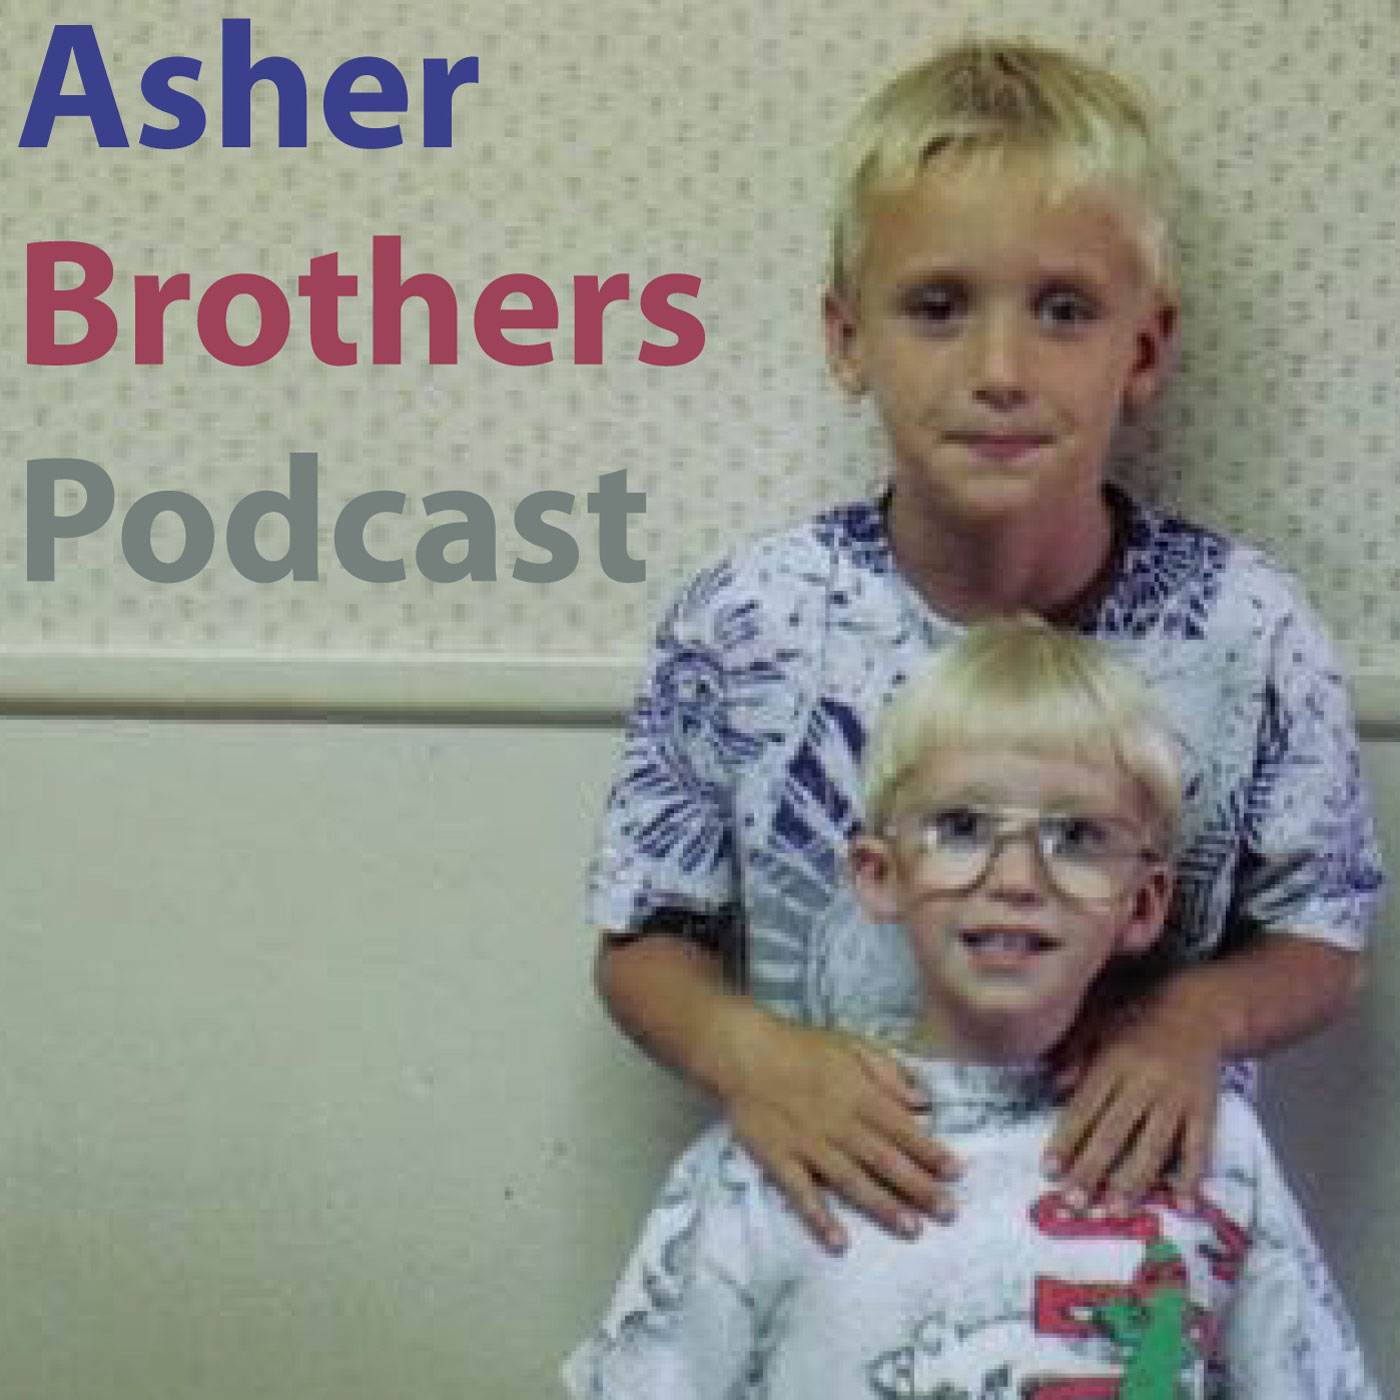 The Asher Brothers Podcast